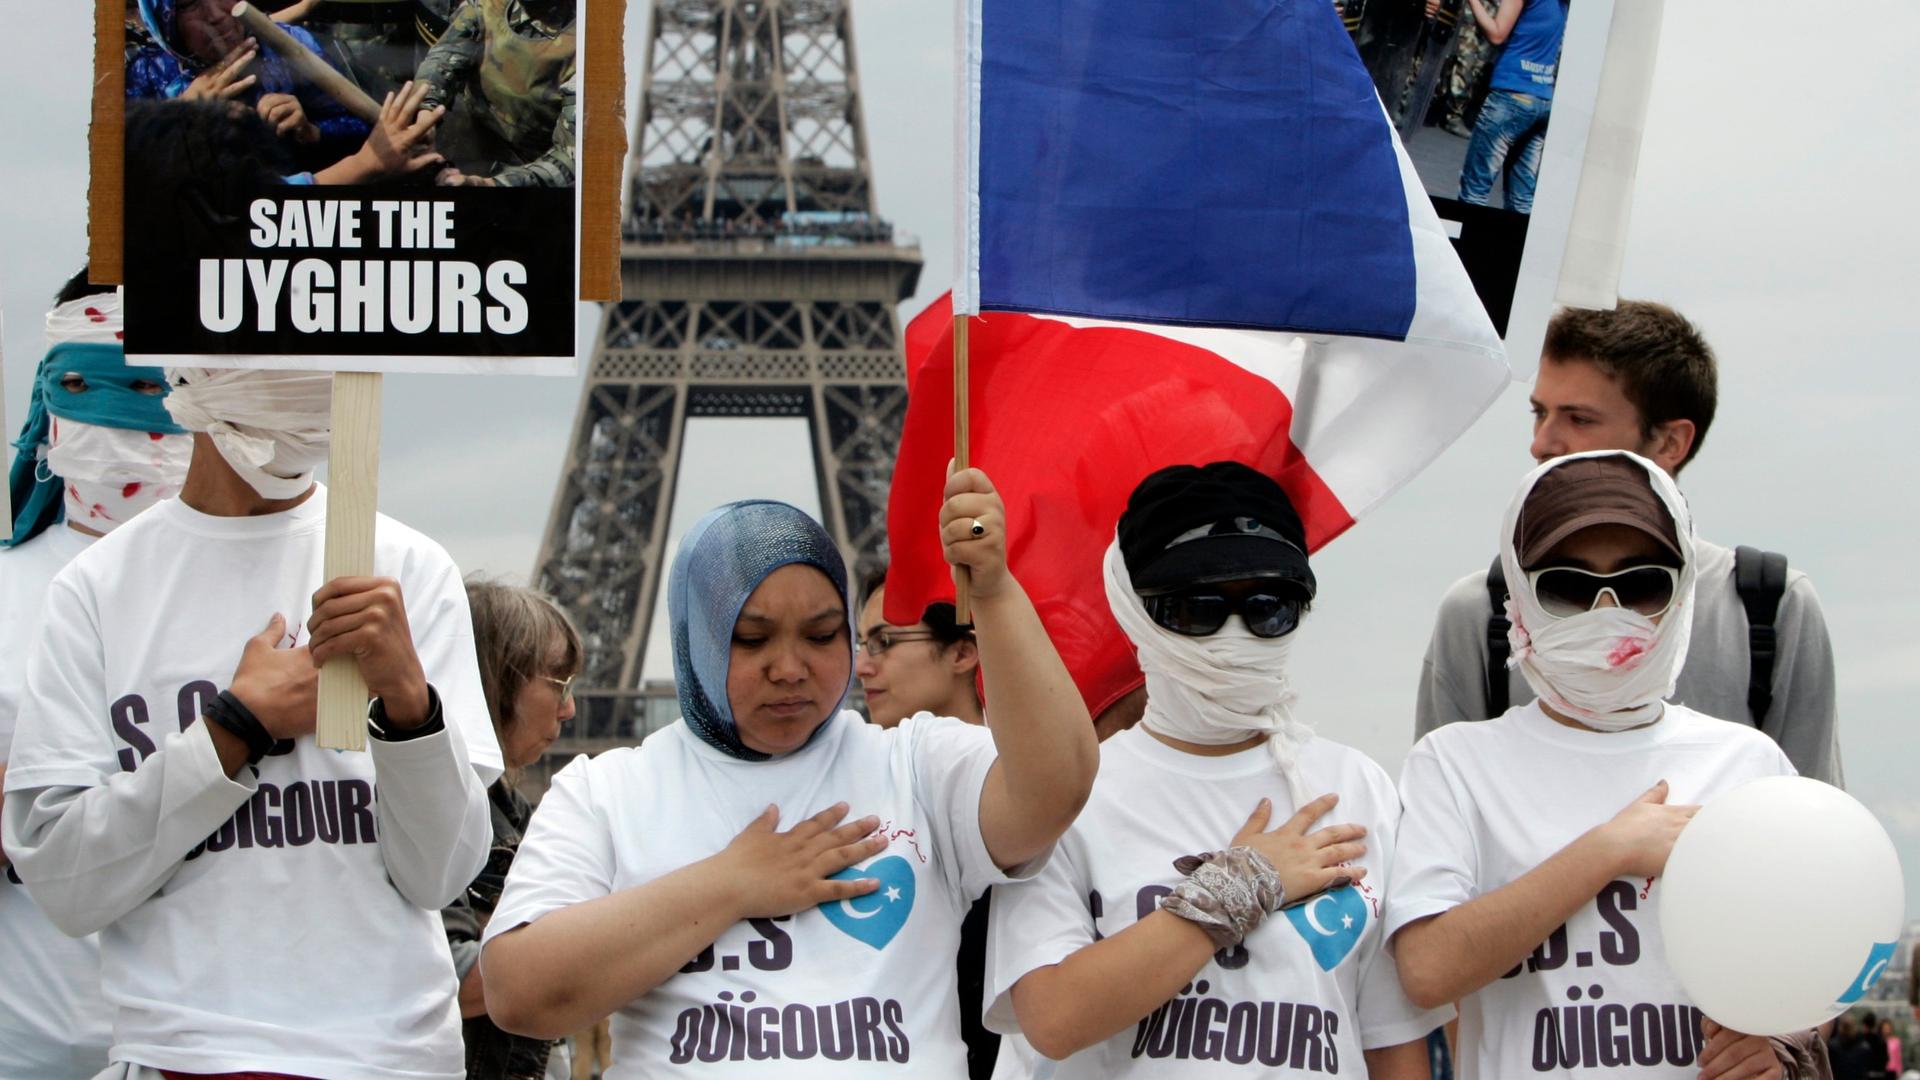 Uighur protesters, wearing bandages over mock wounds, hold placards and wave a French flag as they take part in a demonstration condemning violence in China's Xinjiang province, at the Trocadero near the Eiffel Tower in Paris, France, July 8, 2009.